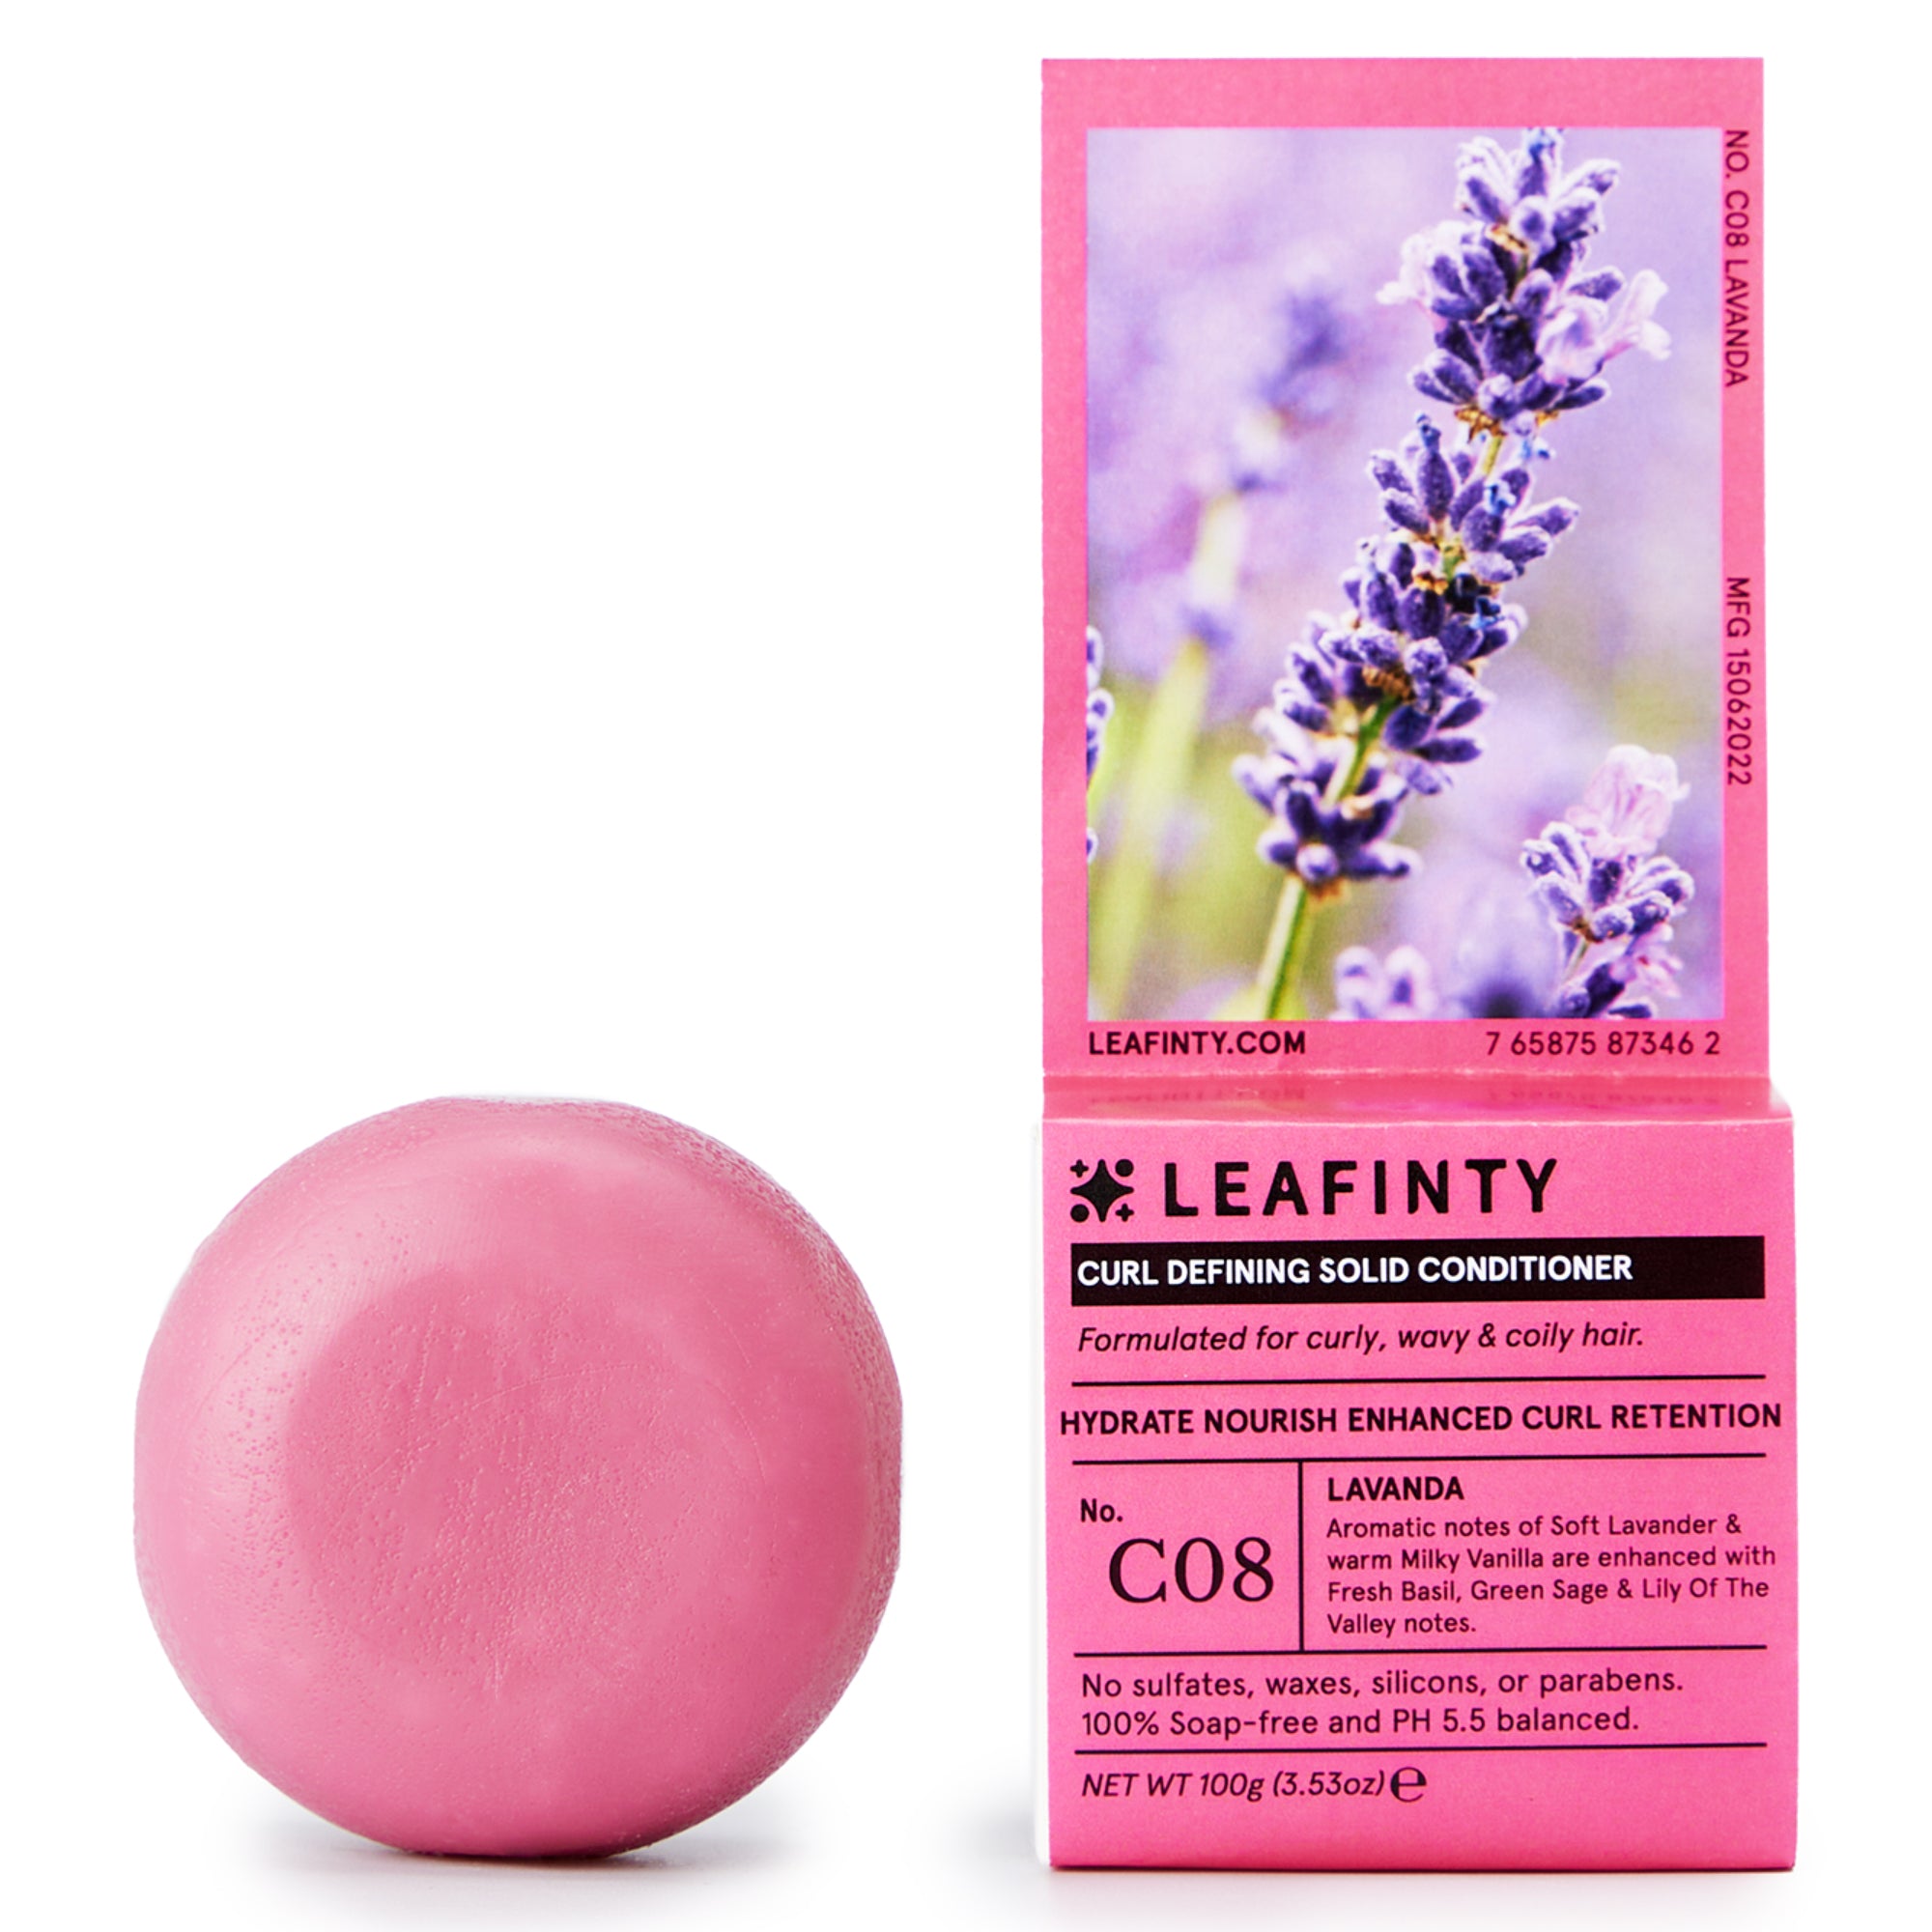 C08 Solid Conditioner Bar for Curly, Wavy & Coily Hair